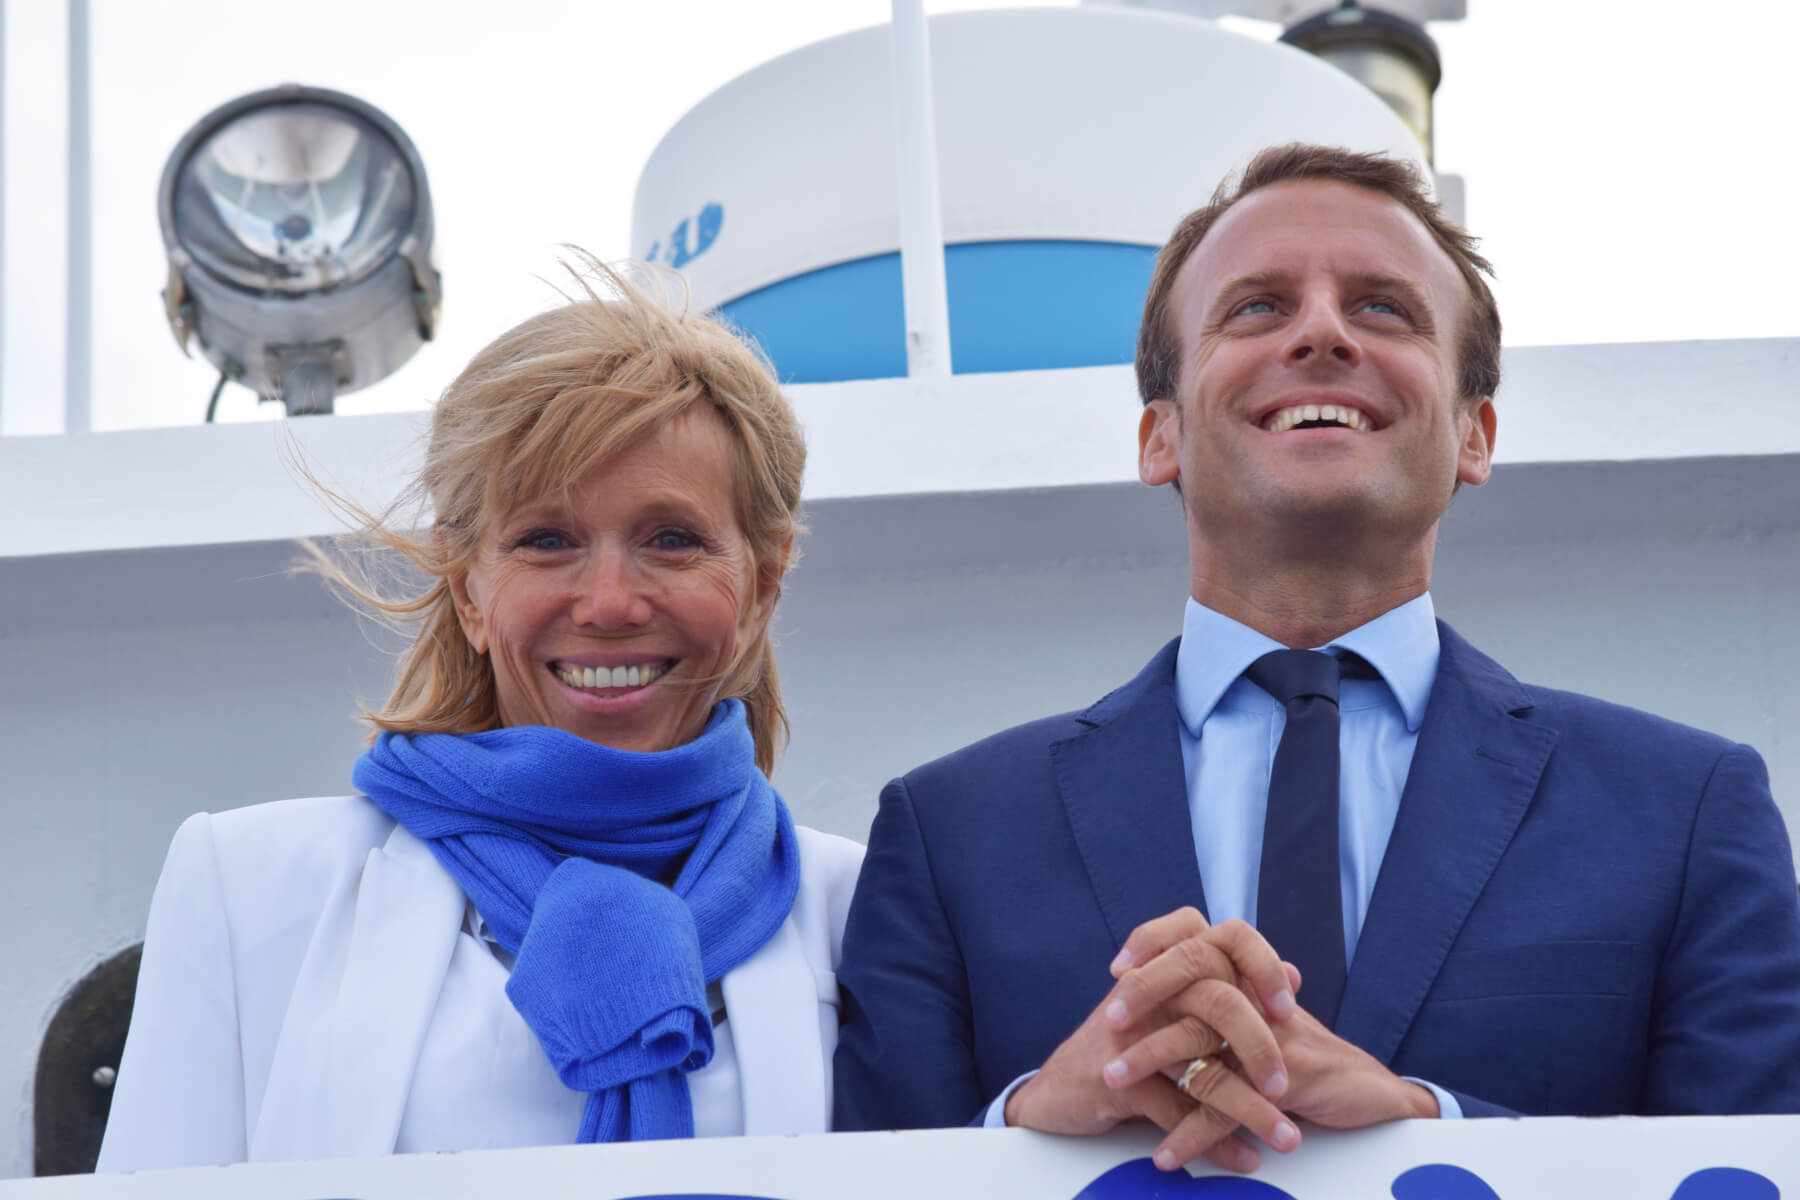 Is The French President’s Wife A Cougar? Am I A Cougar?